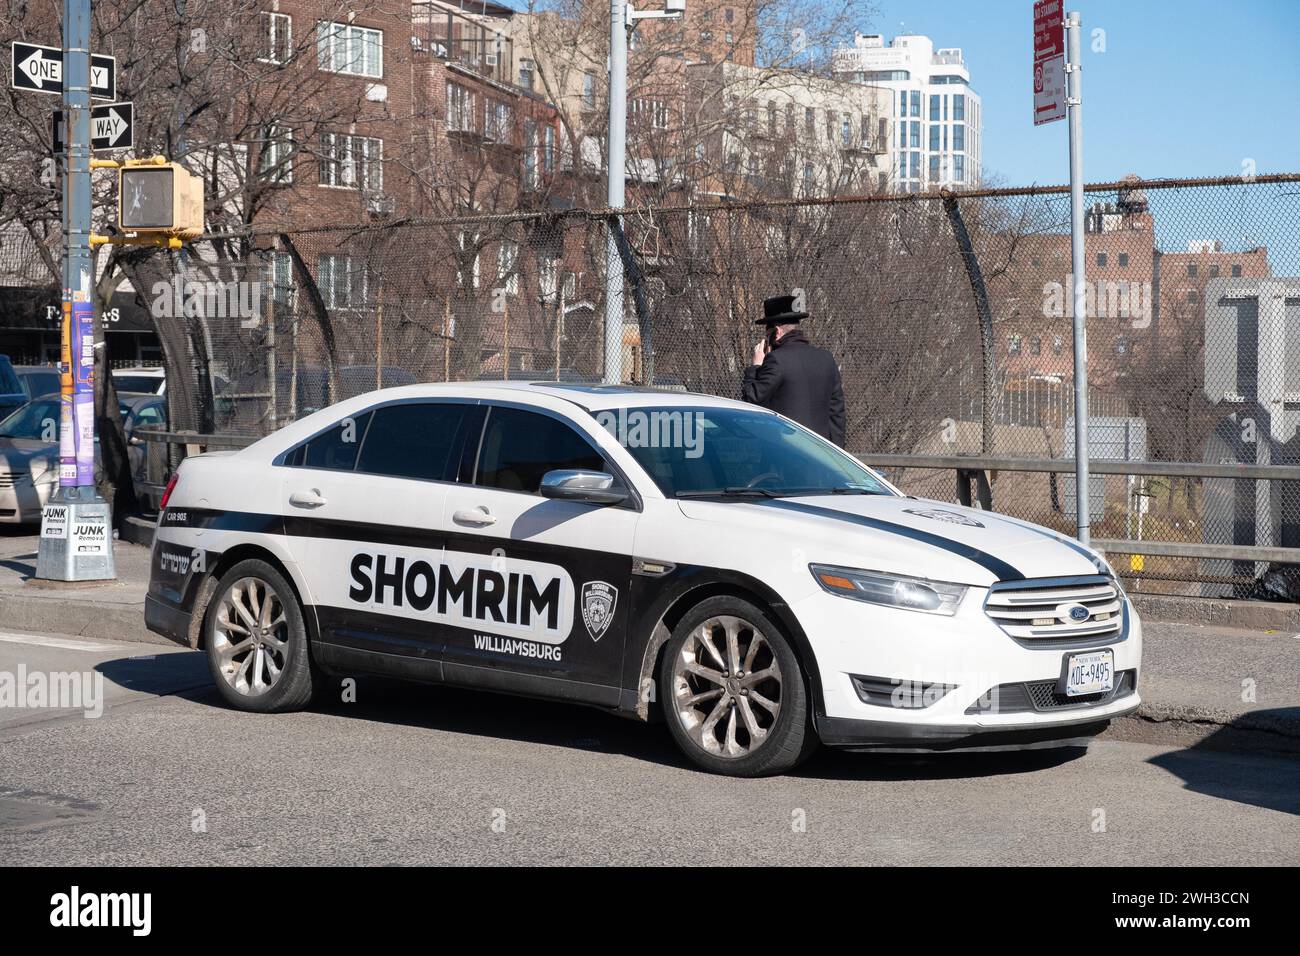 A car from Shomrim, a Jewish civilian patrol unit, protecting orthodox Jews from antisemitic peoples and behavior. Stock Photo